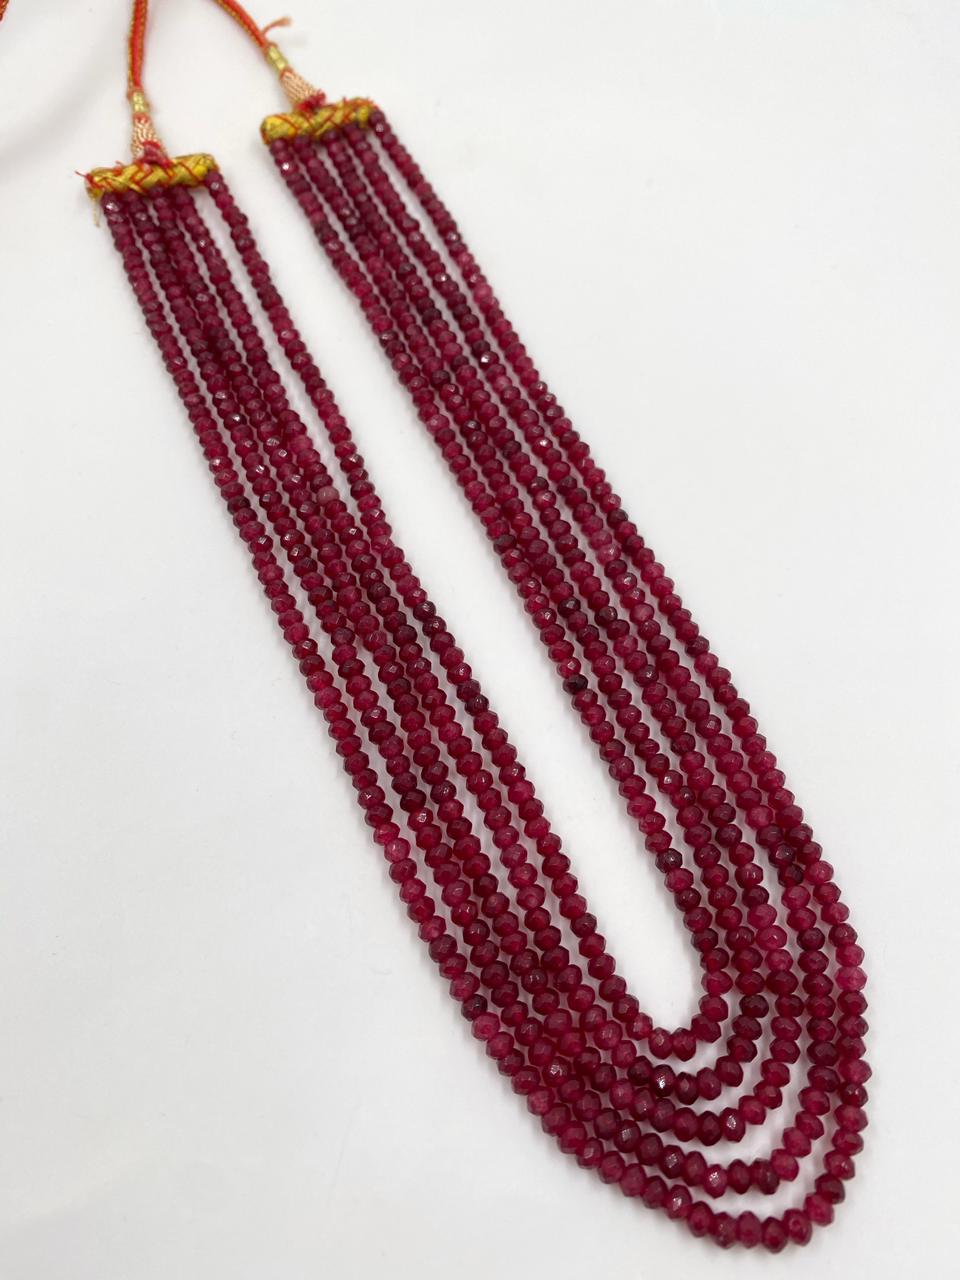 Multilayered Semi Precious Red Jade Beads Necklace By Gehna Shop Beads Jewellery